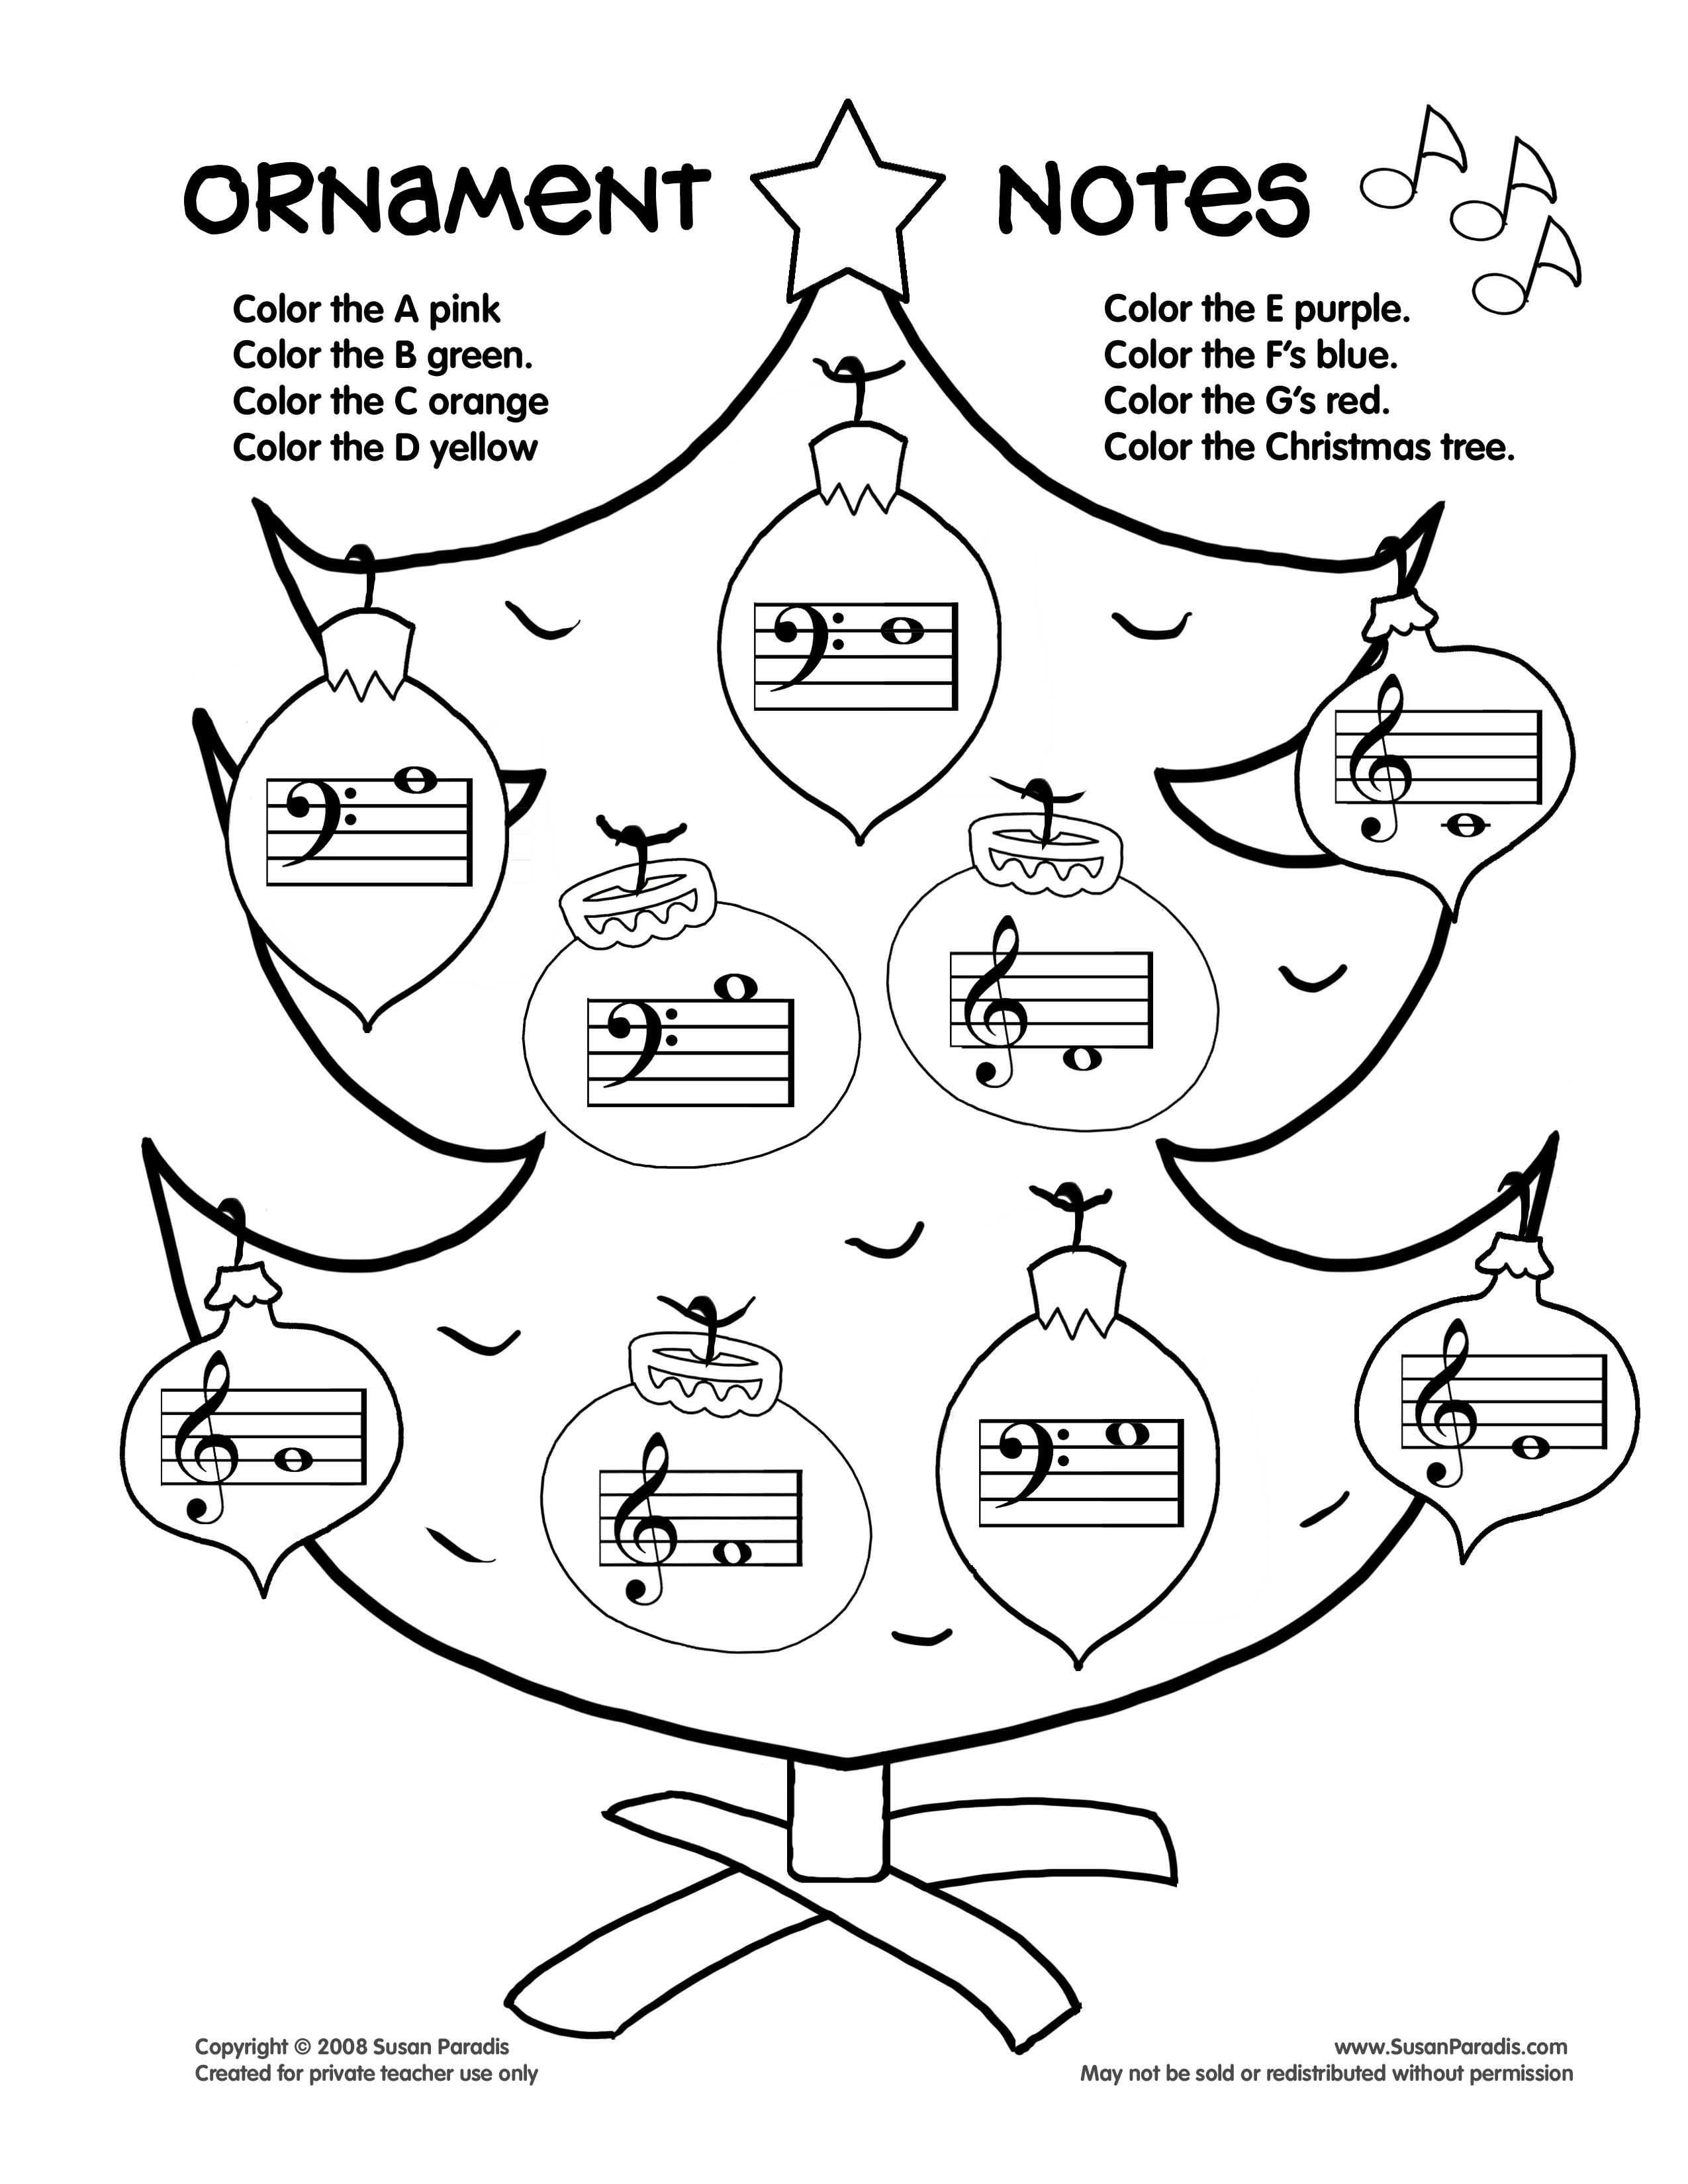 Bunch Ideas Of Free Printable Middle School Music Worksheets With Together With Free Music Worksheets For Middle School